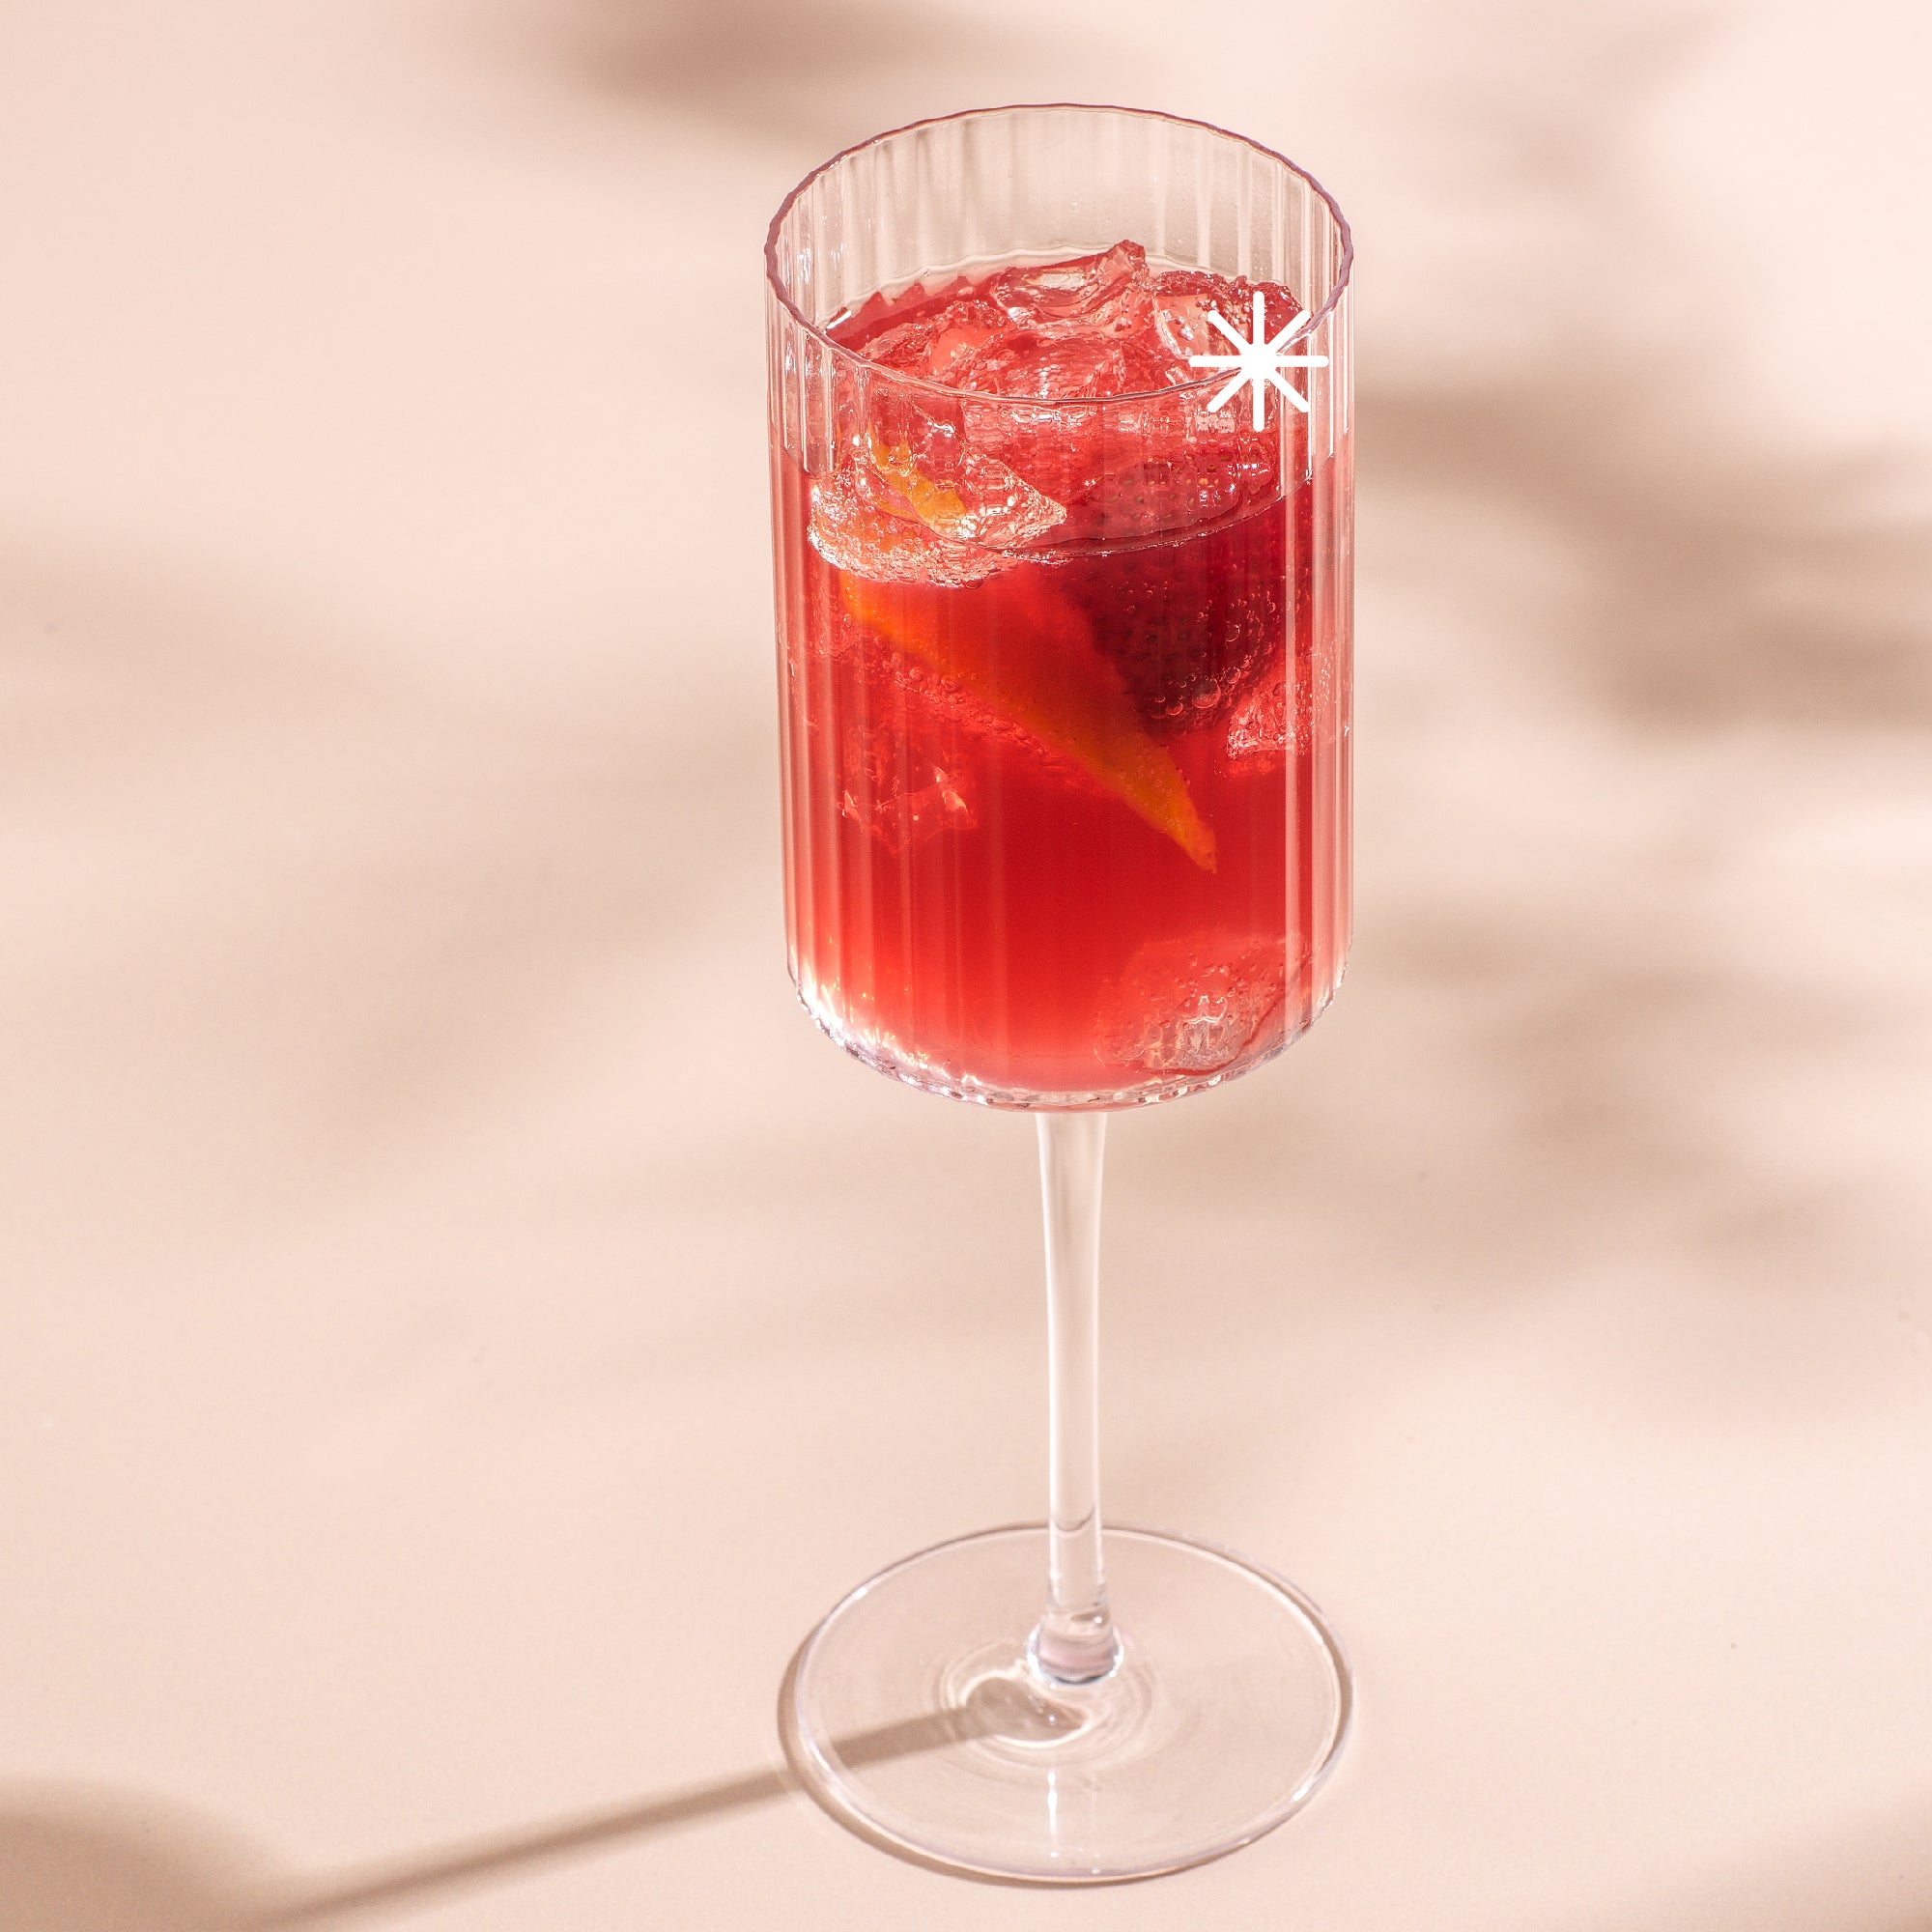 A tall, stemmed glass filled with a refreshing red cocktail. The drink is garnished with a lemon wedge and strawberries, and contains ice cubes.